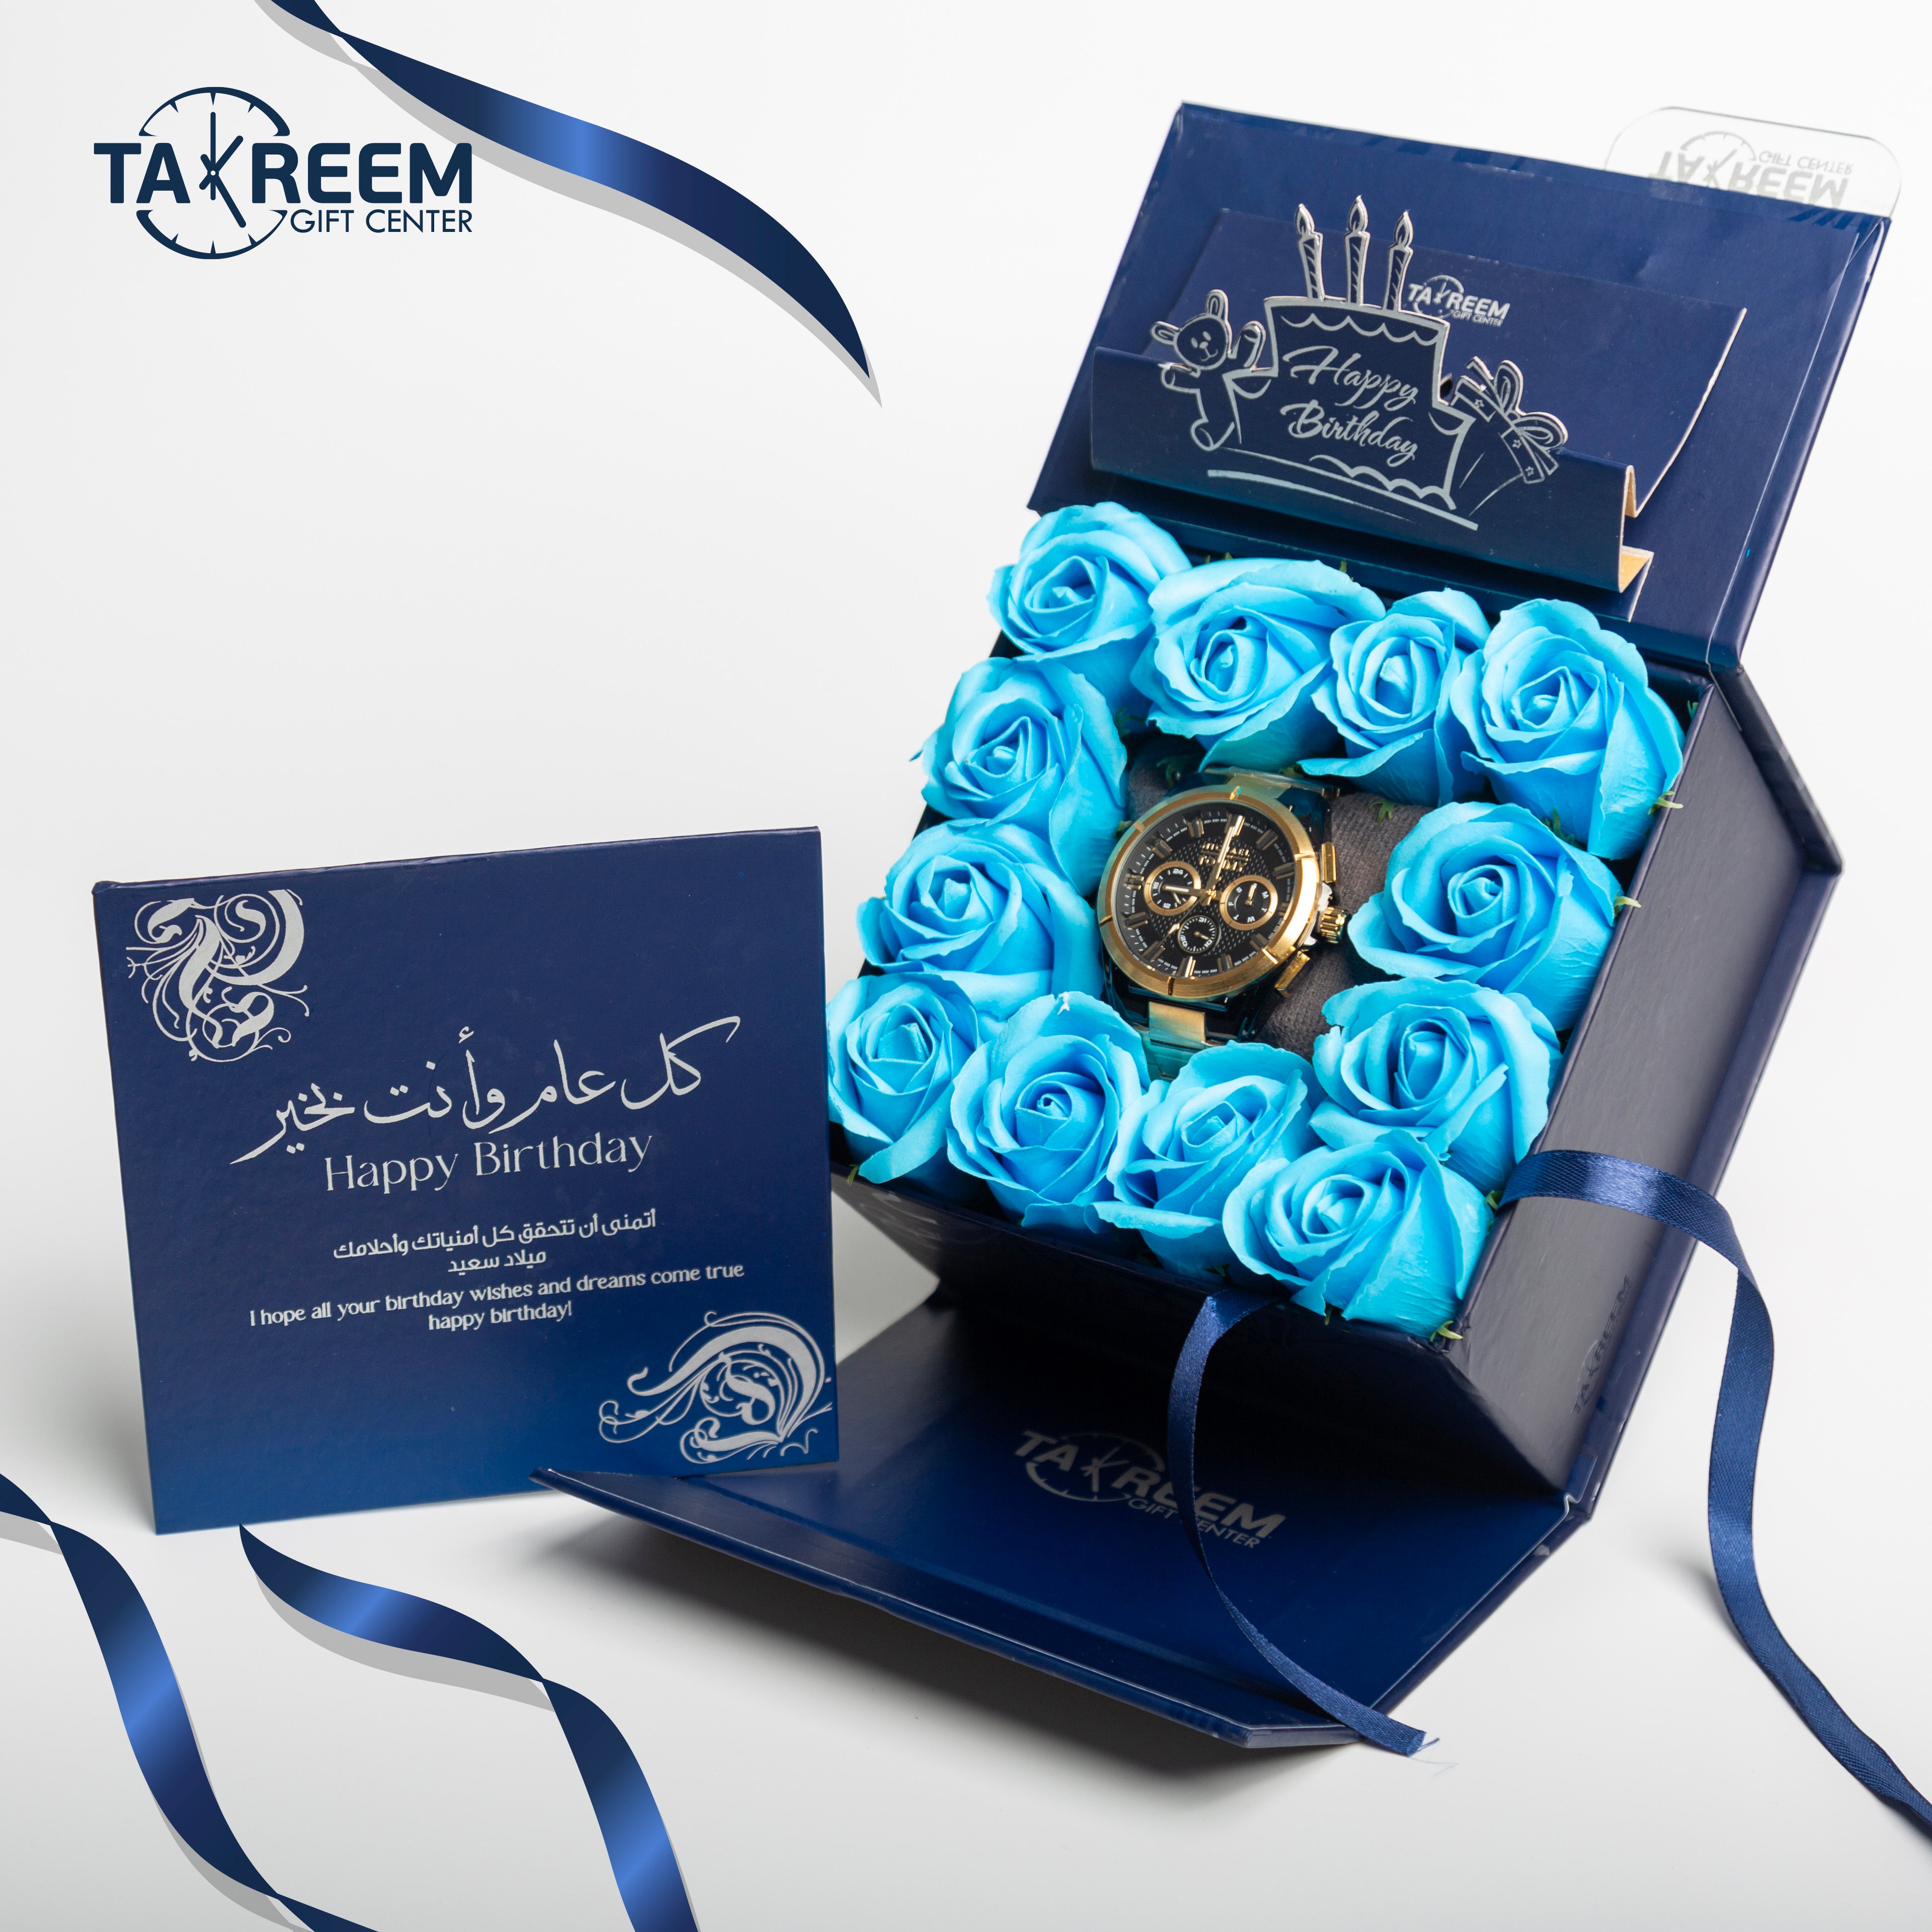 Small Smile9 Gift Boxes  By Takreem Gifts Center